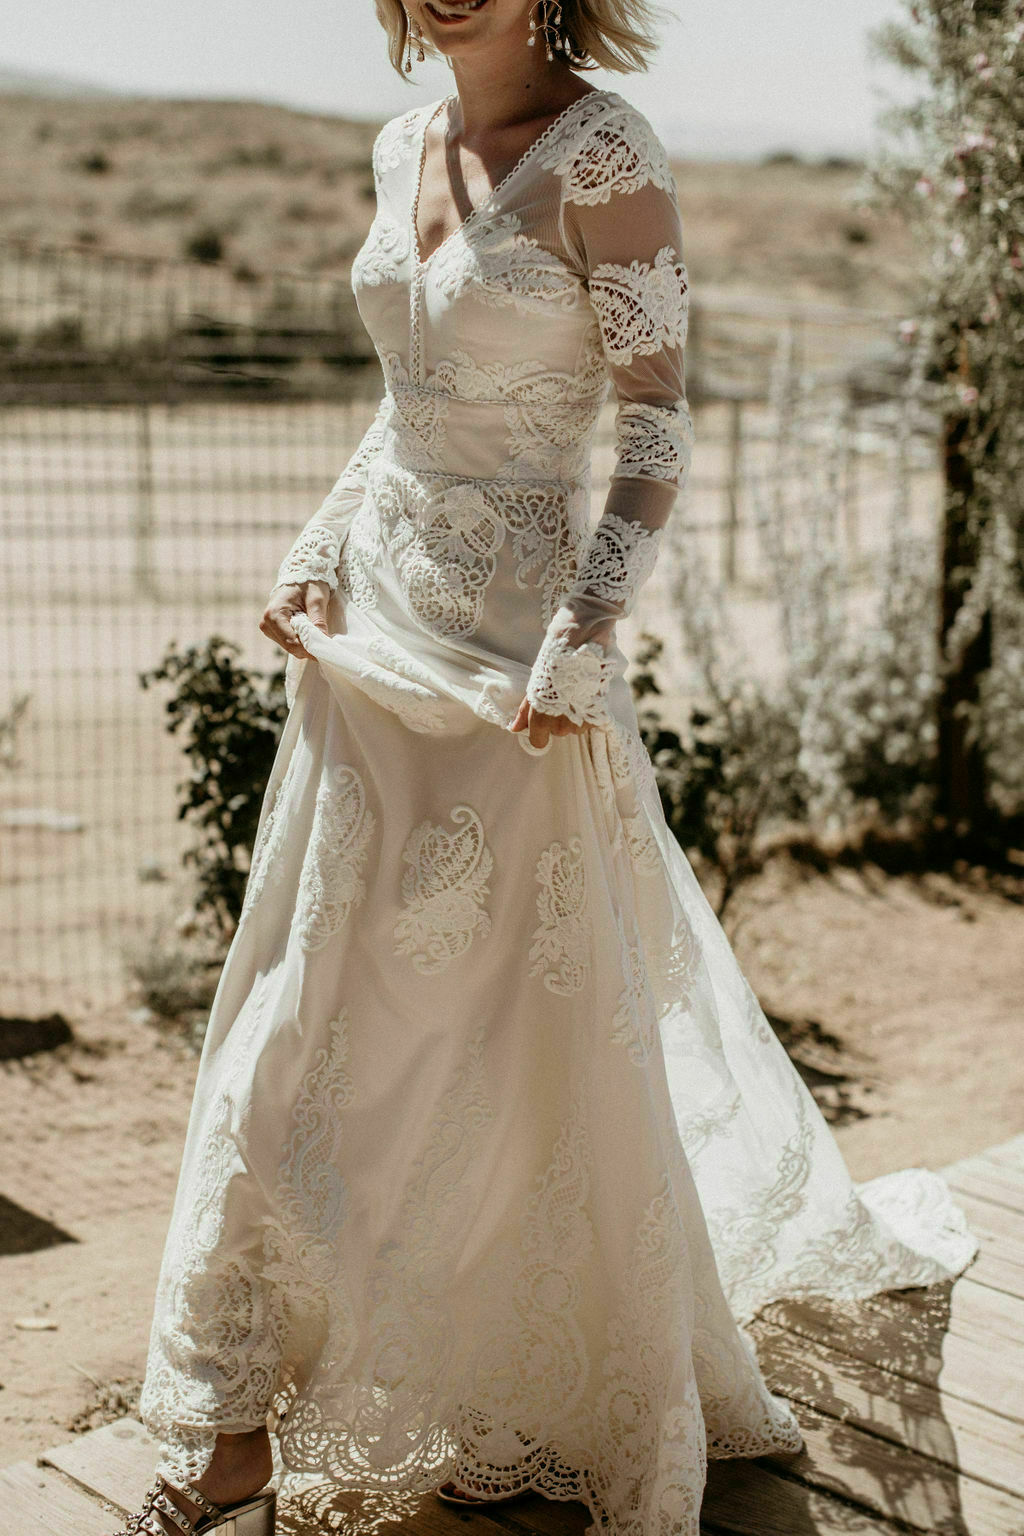 Celeste-lace-wedding-gown-long-sleeved-fitted-waist-flowy-aline-skirt